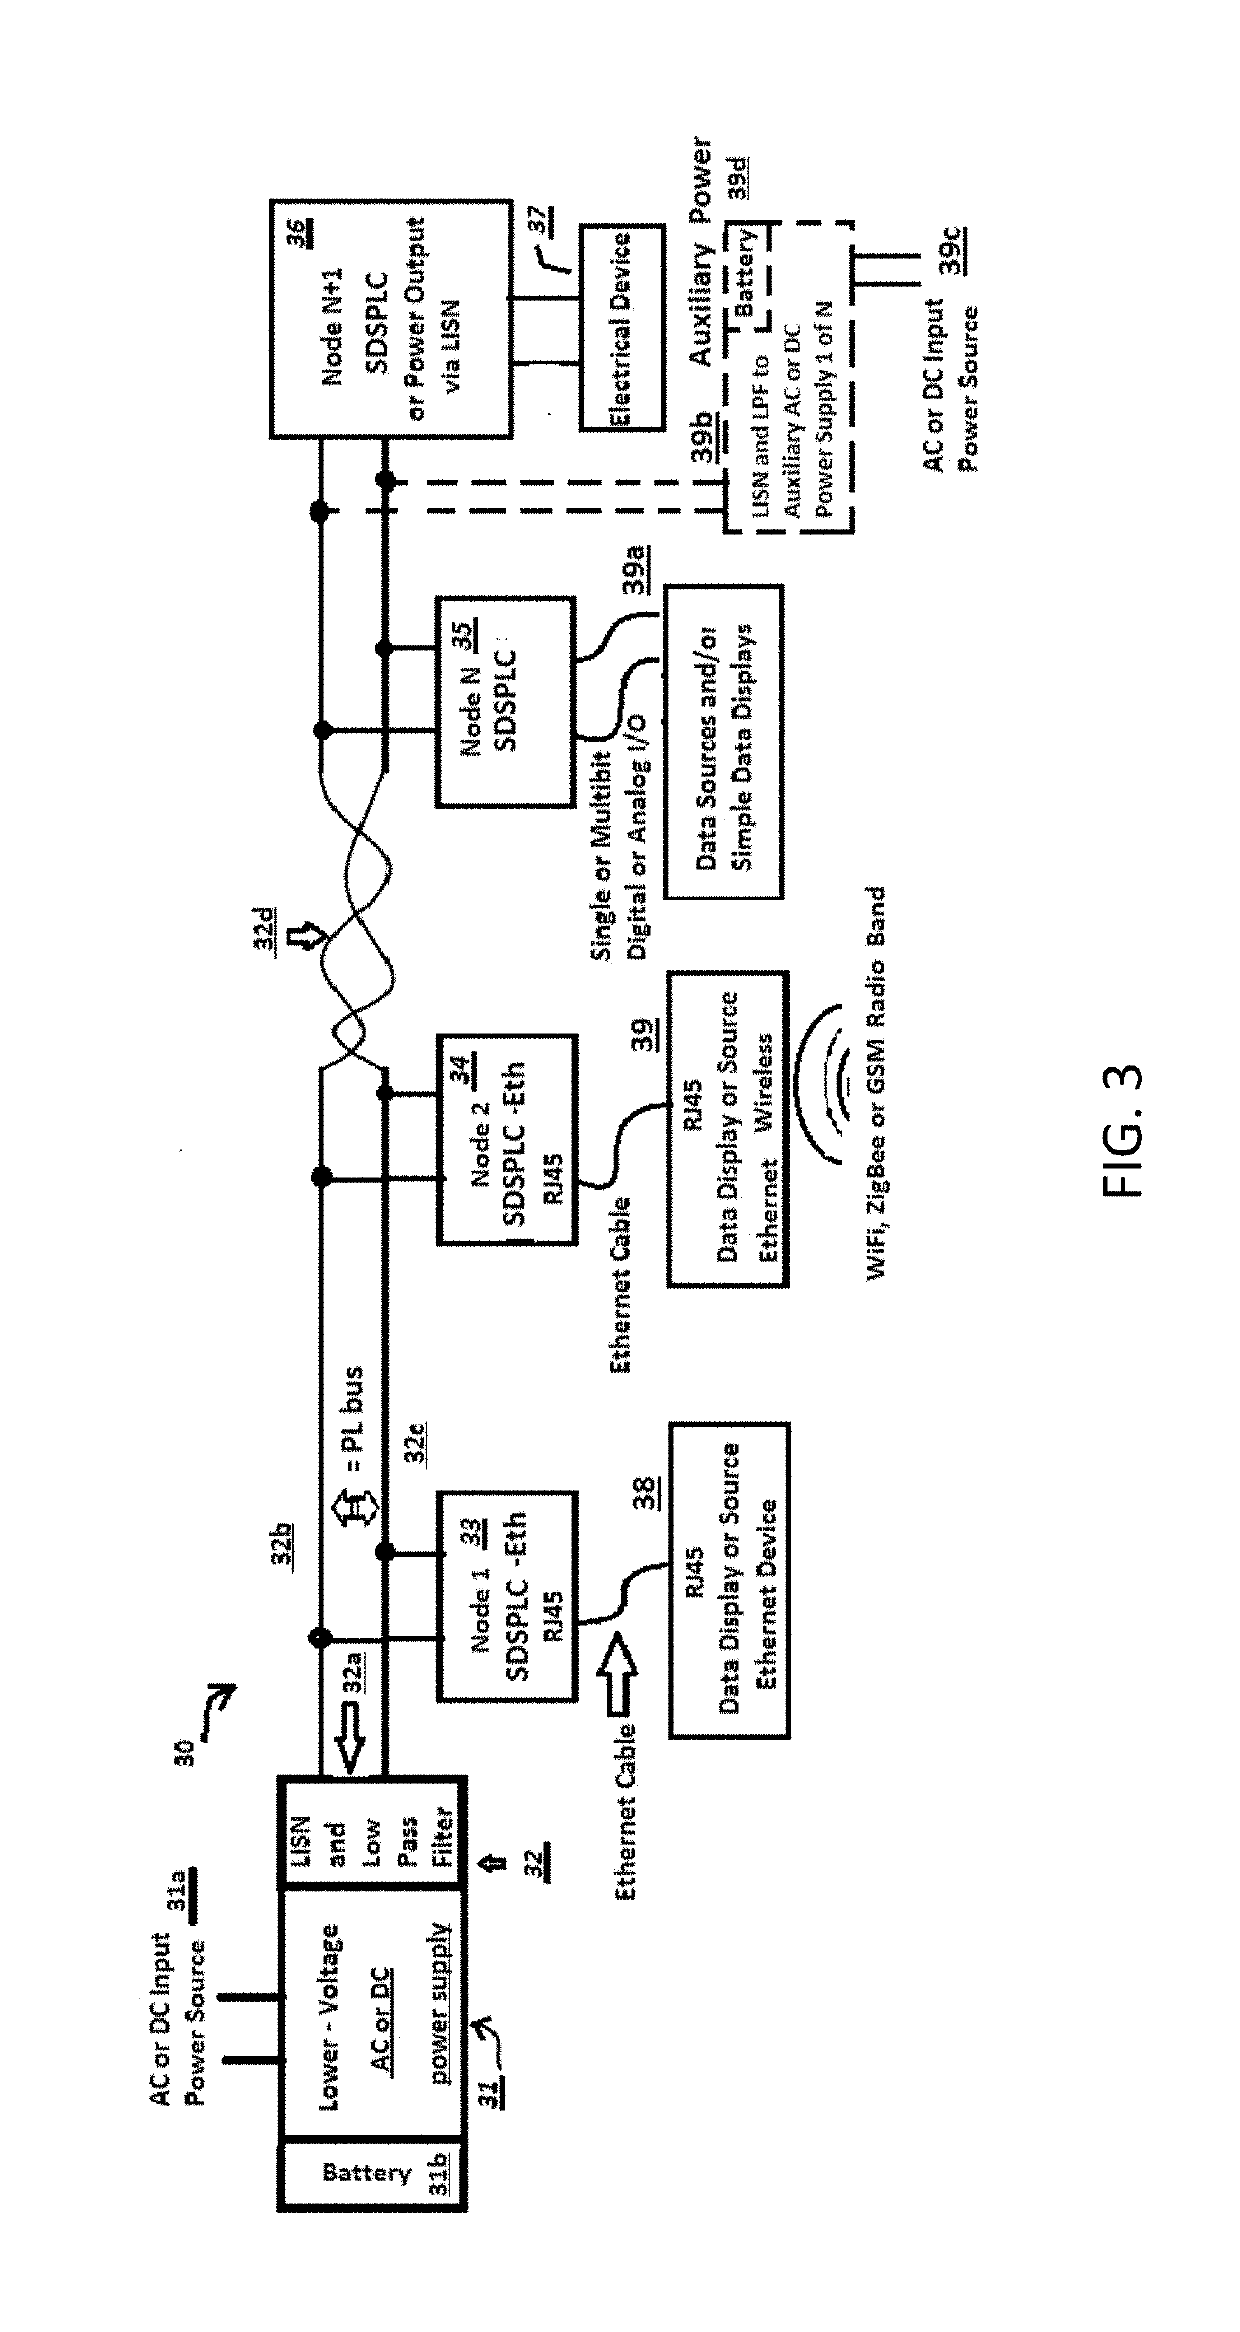 Impedance isolated power and wired data communication network